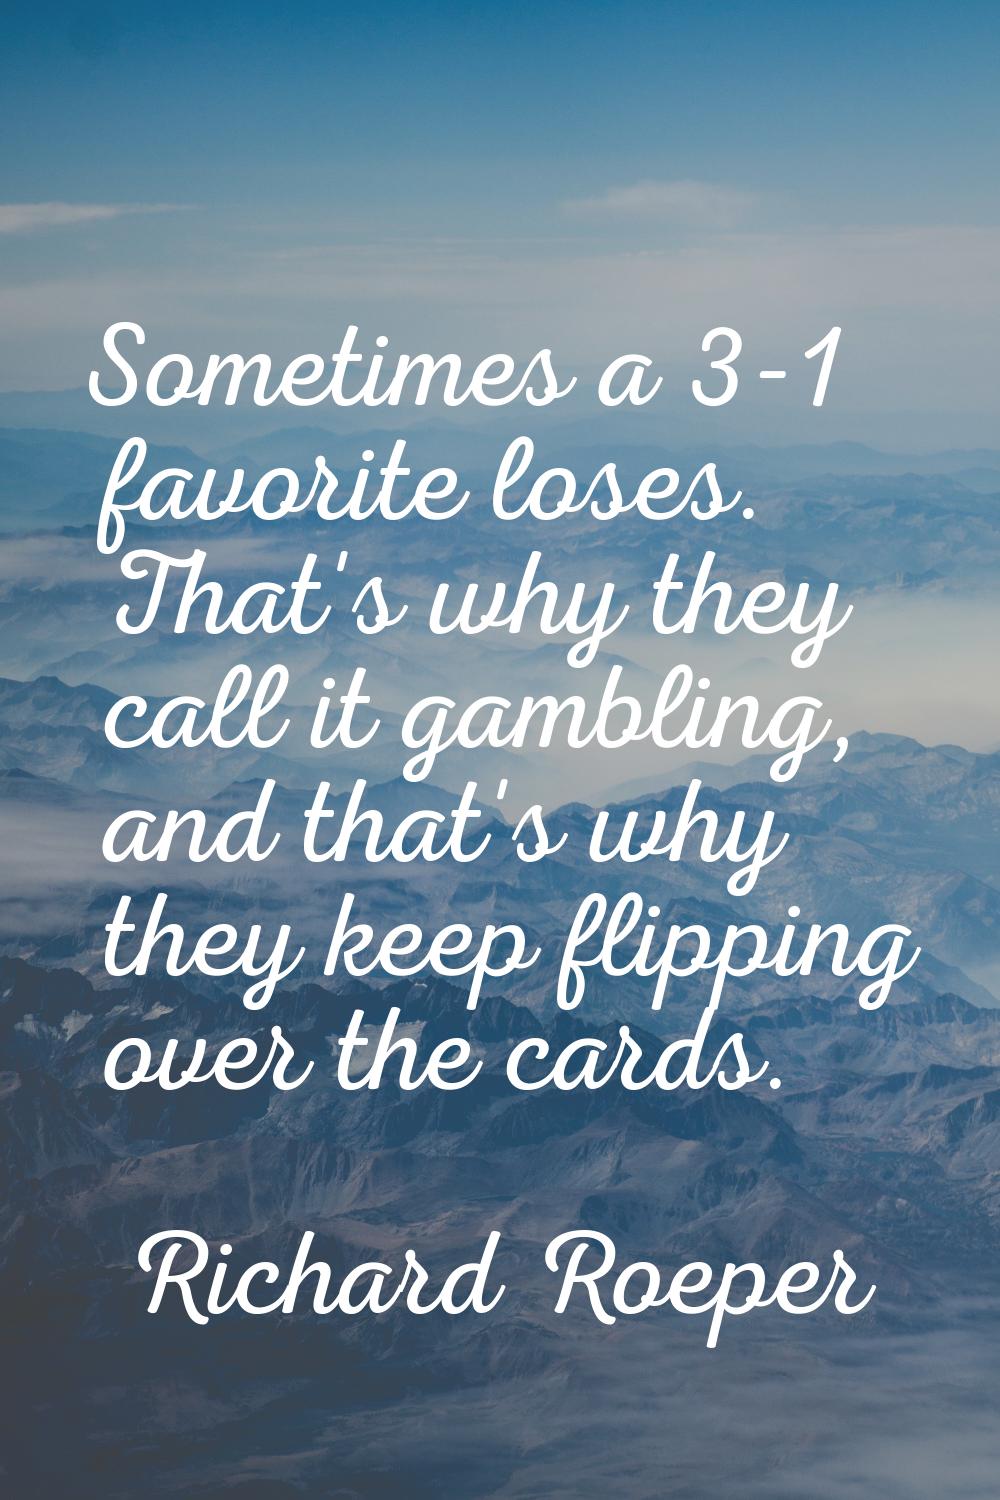 Sometimes a 3-1 favorite loses. That's why they call it gambling, and that's why they keep flipping